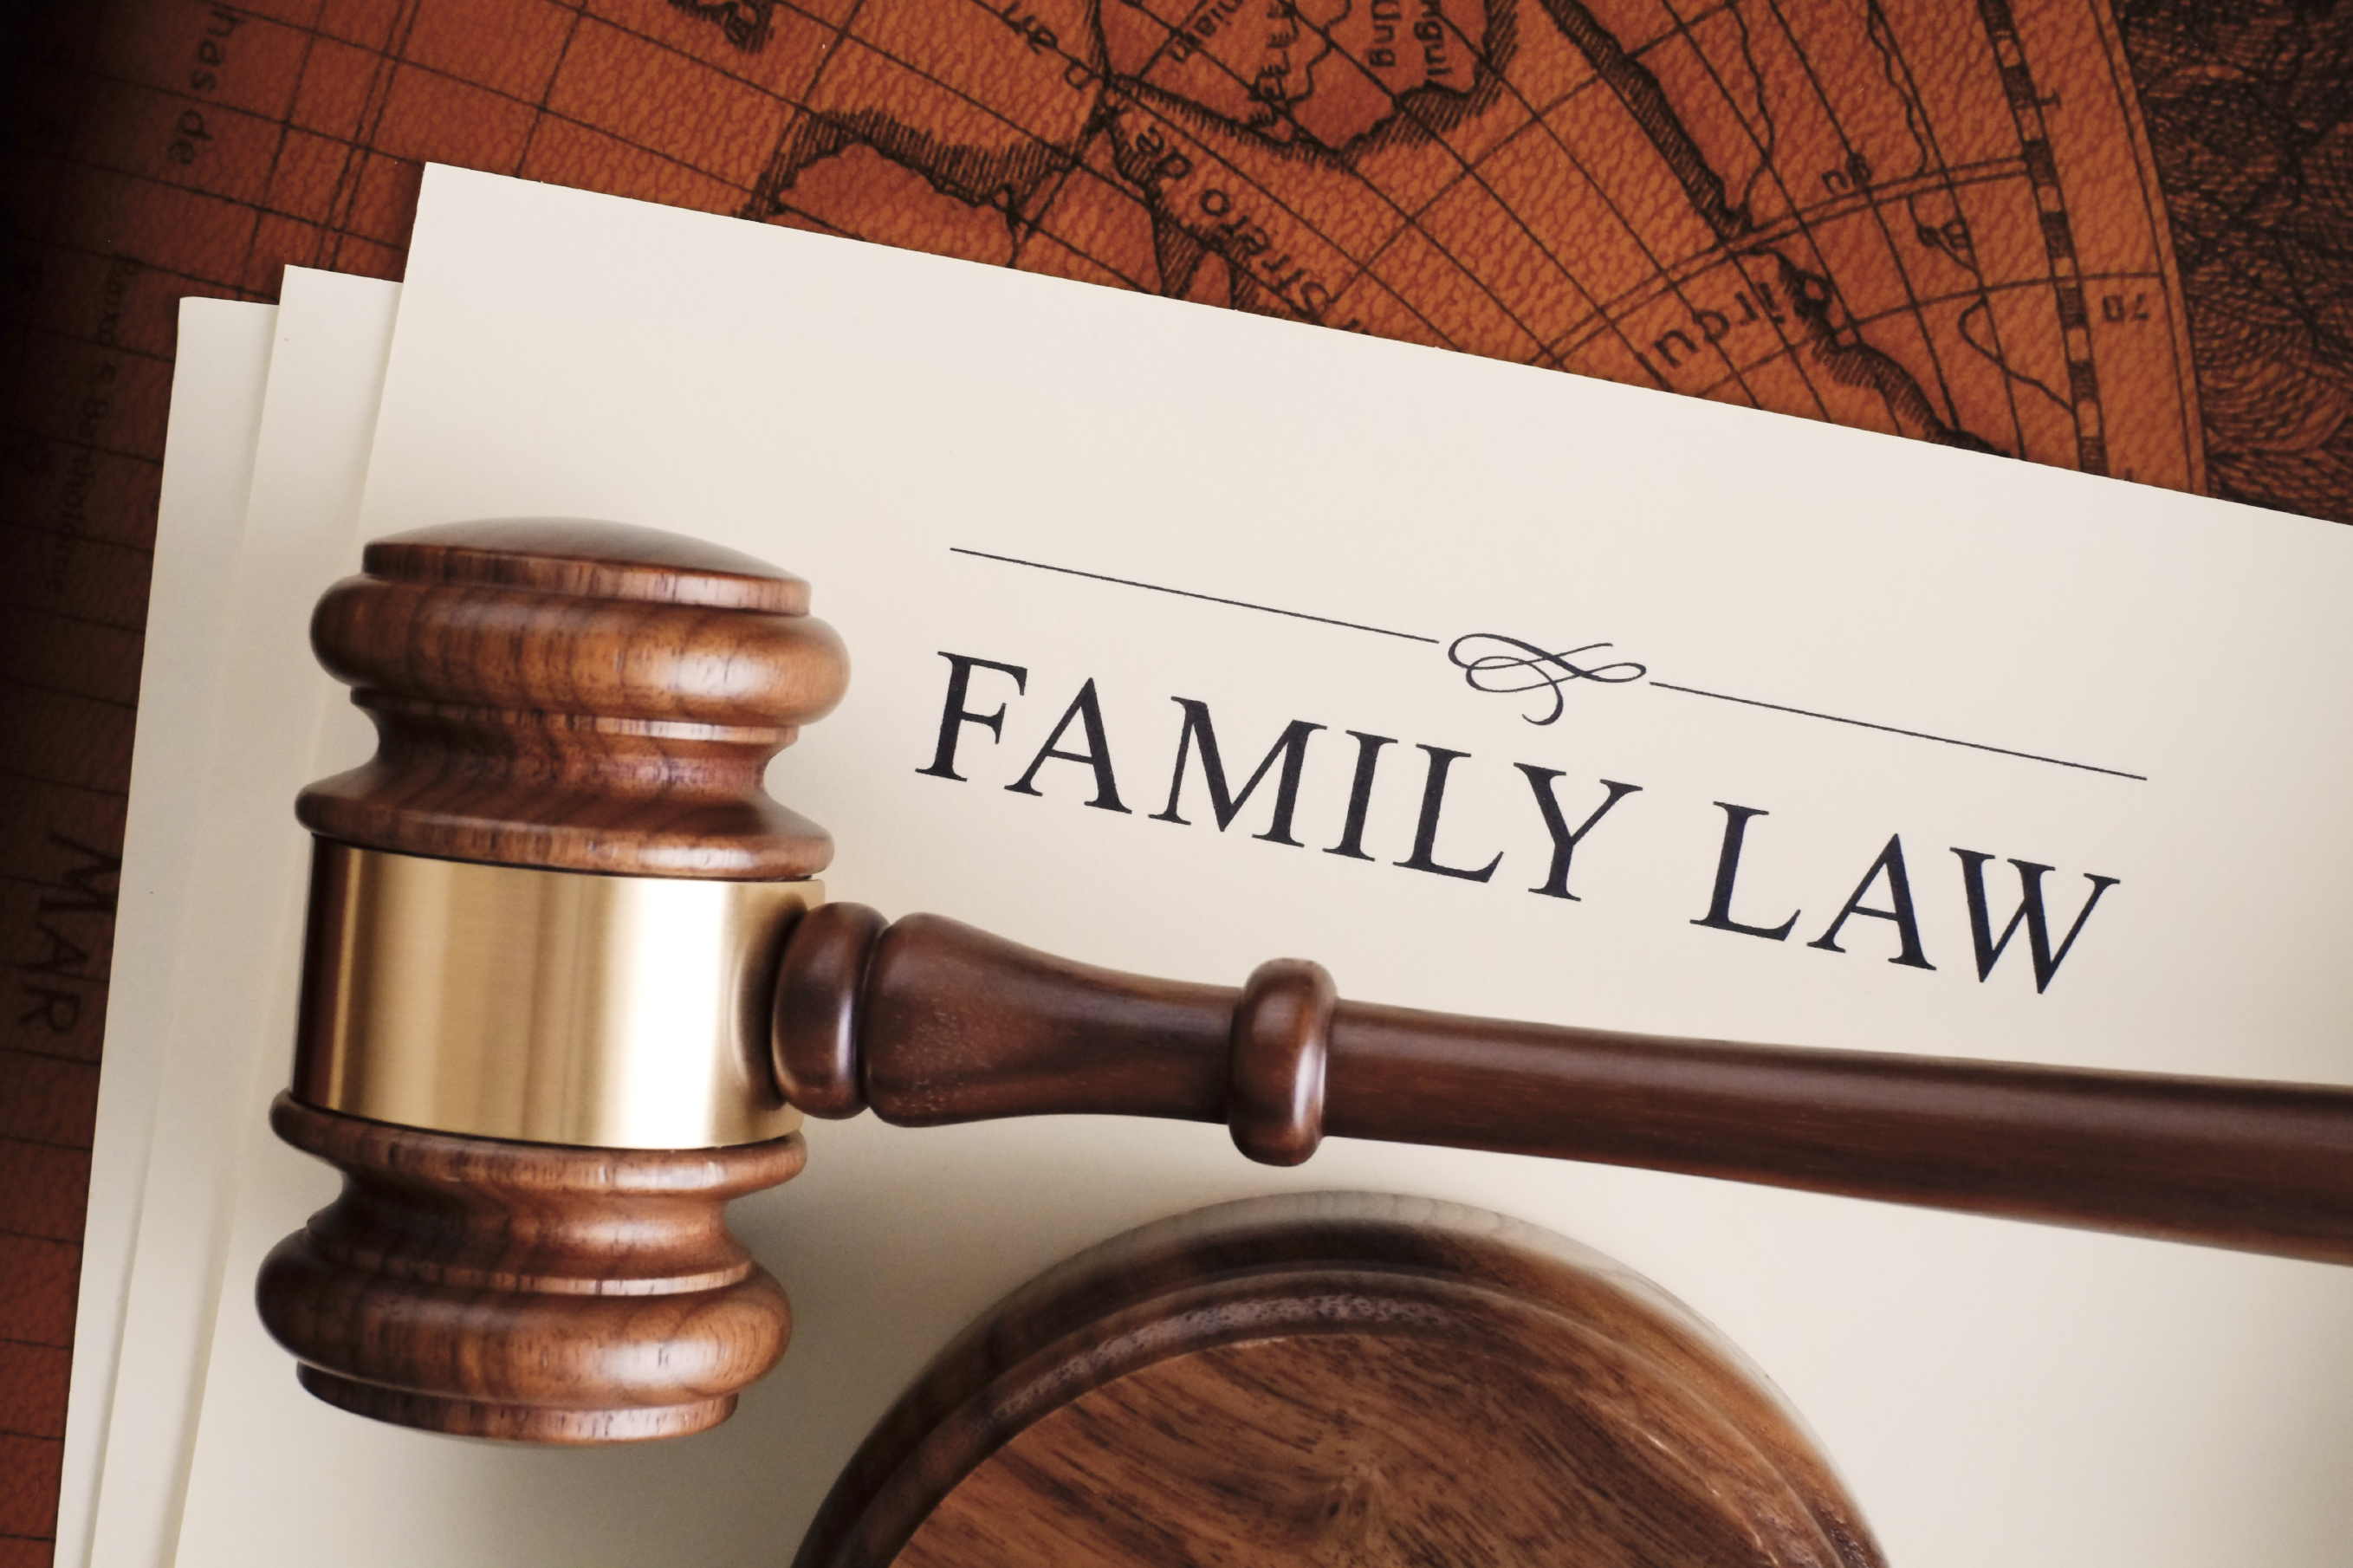 What Do Family Law Firms Deal With?